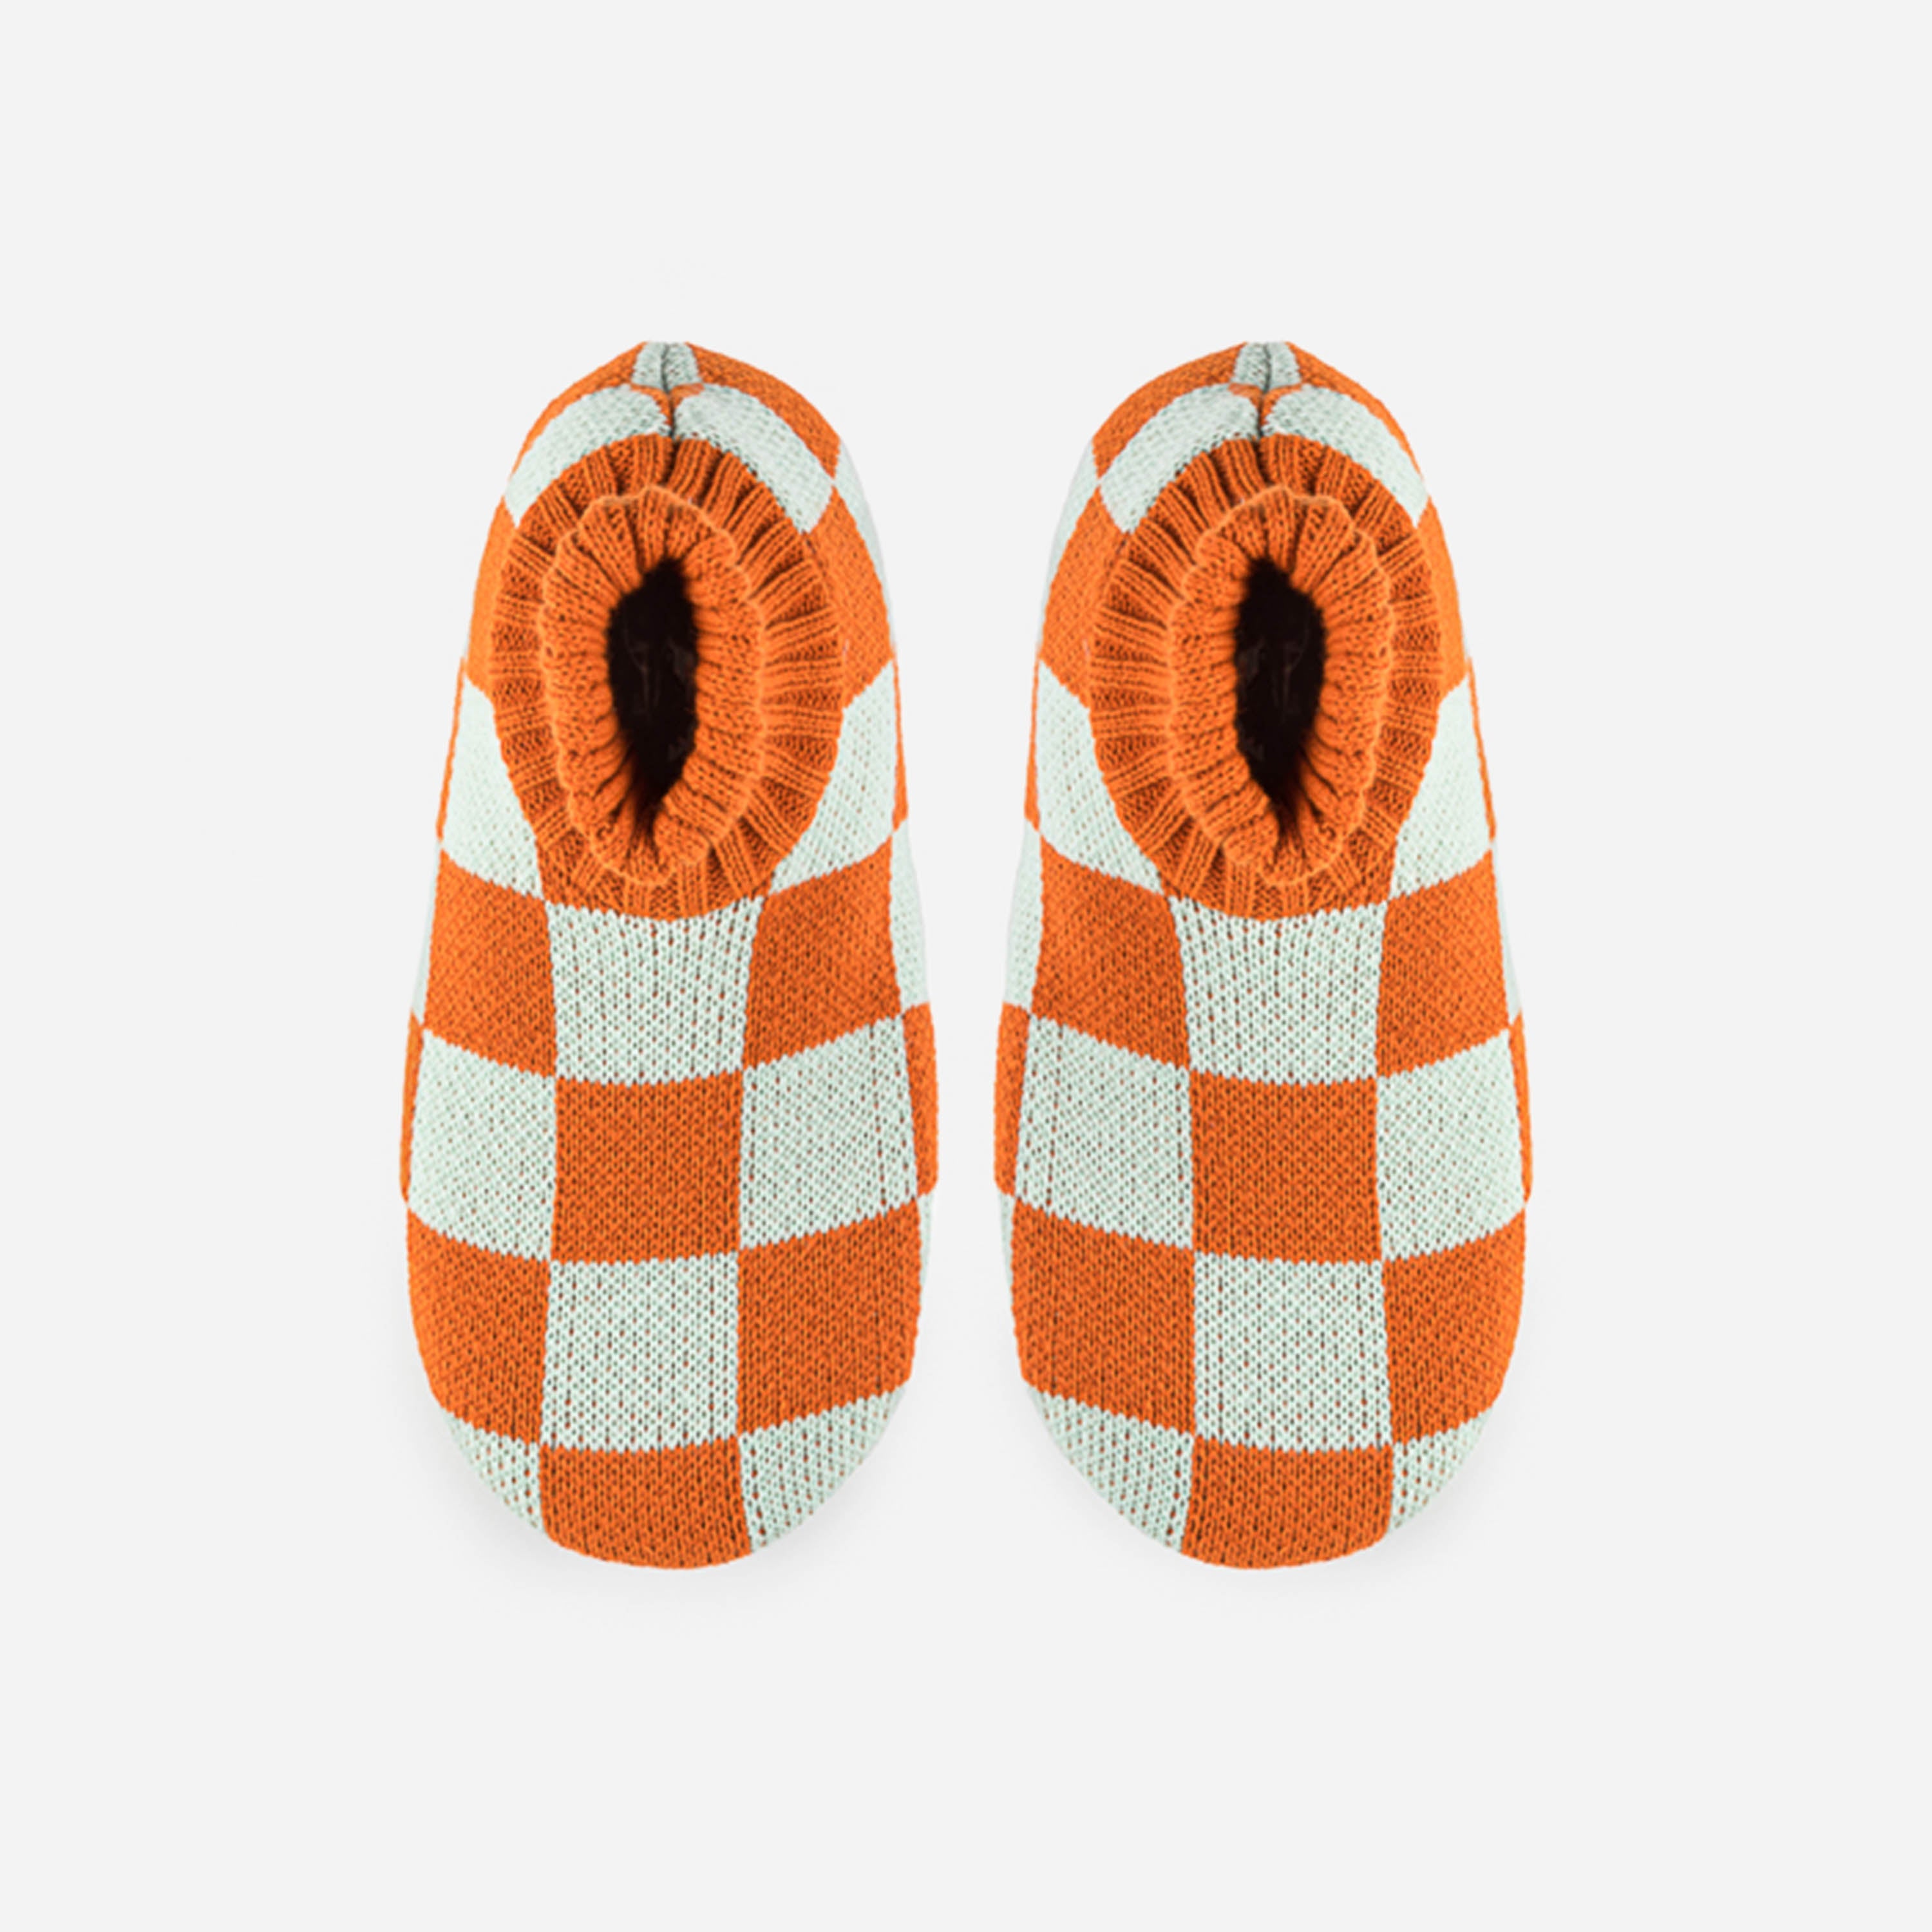 Checkerboard Knit Sock Slippers